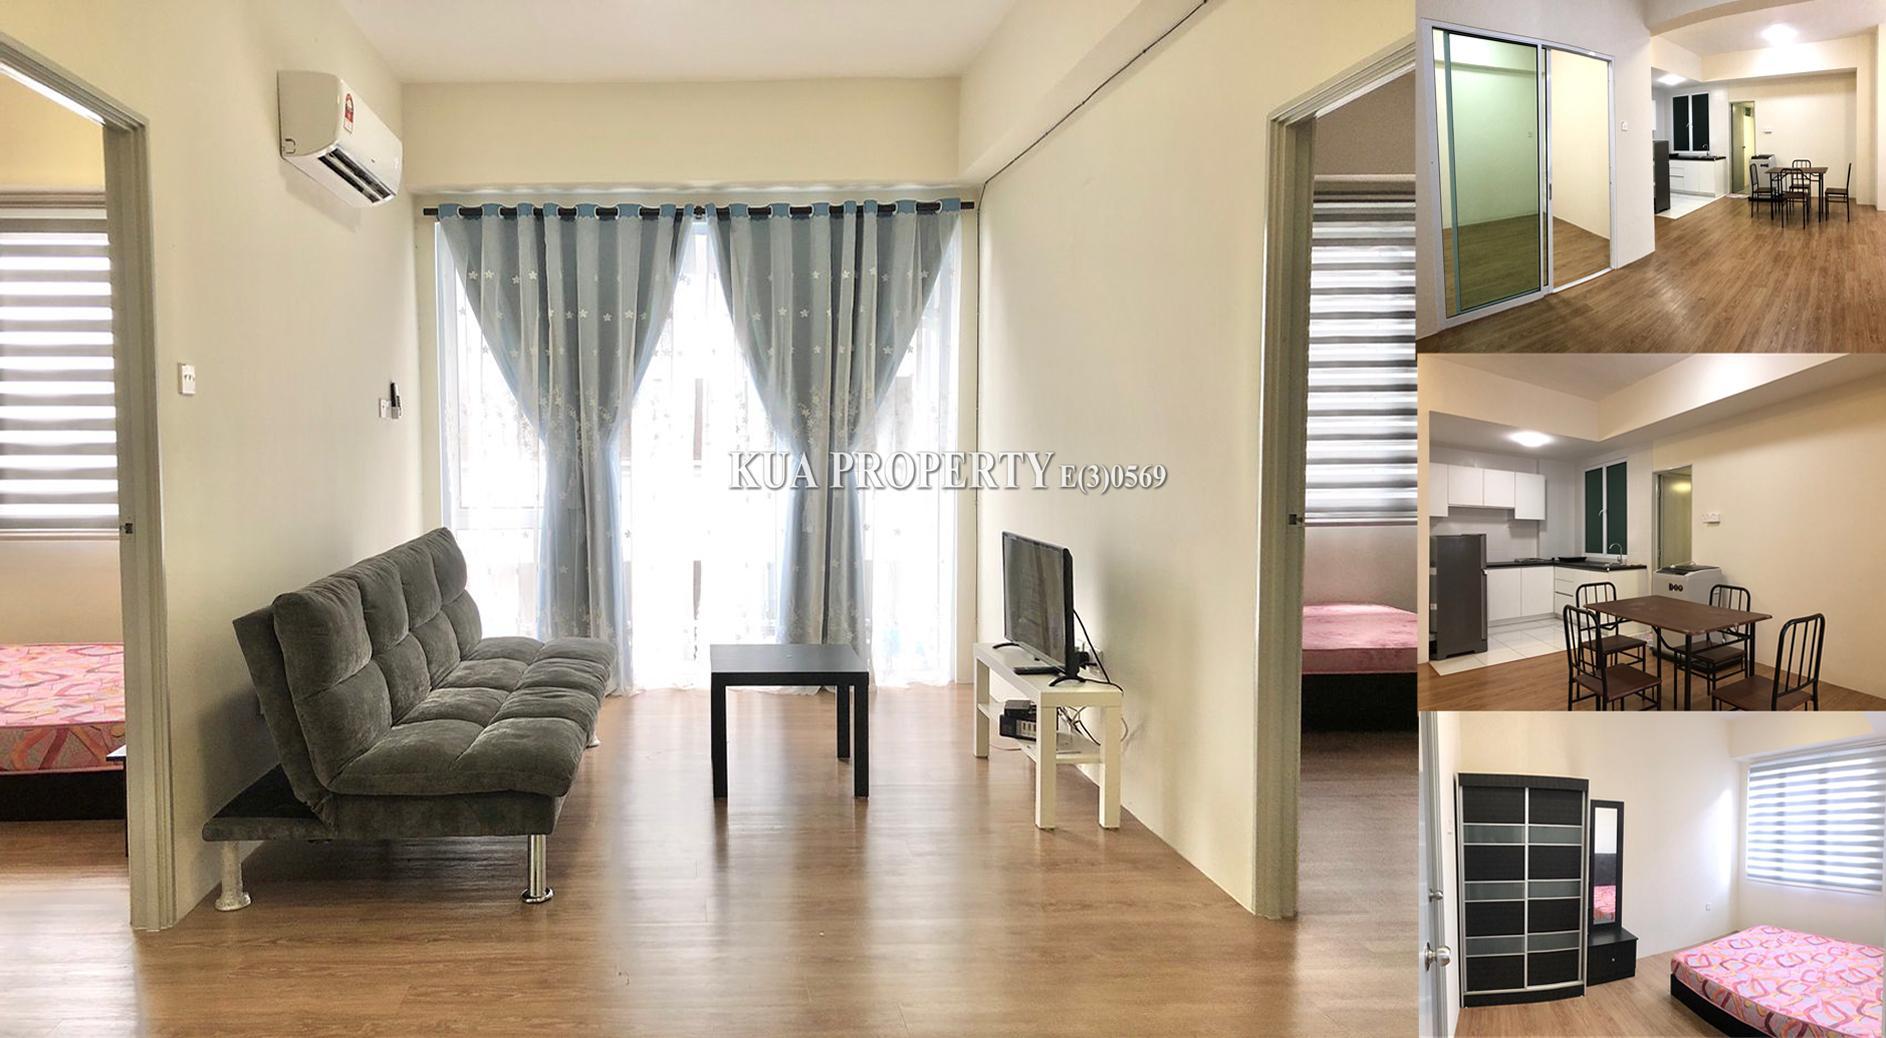 Genesis Mall 2 Apartment For Rent! Located at Moyan, above Emart